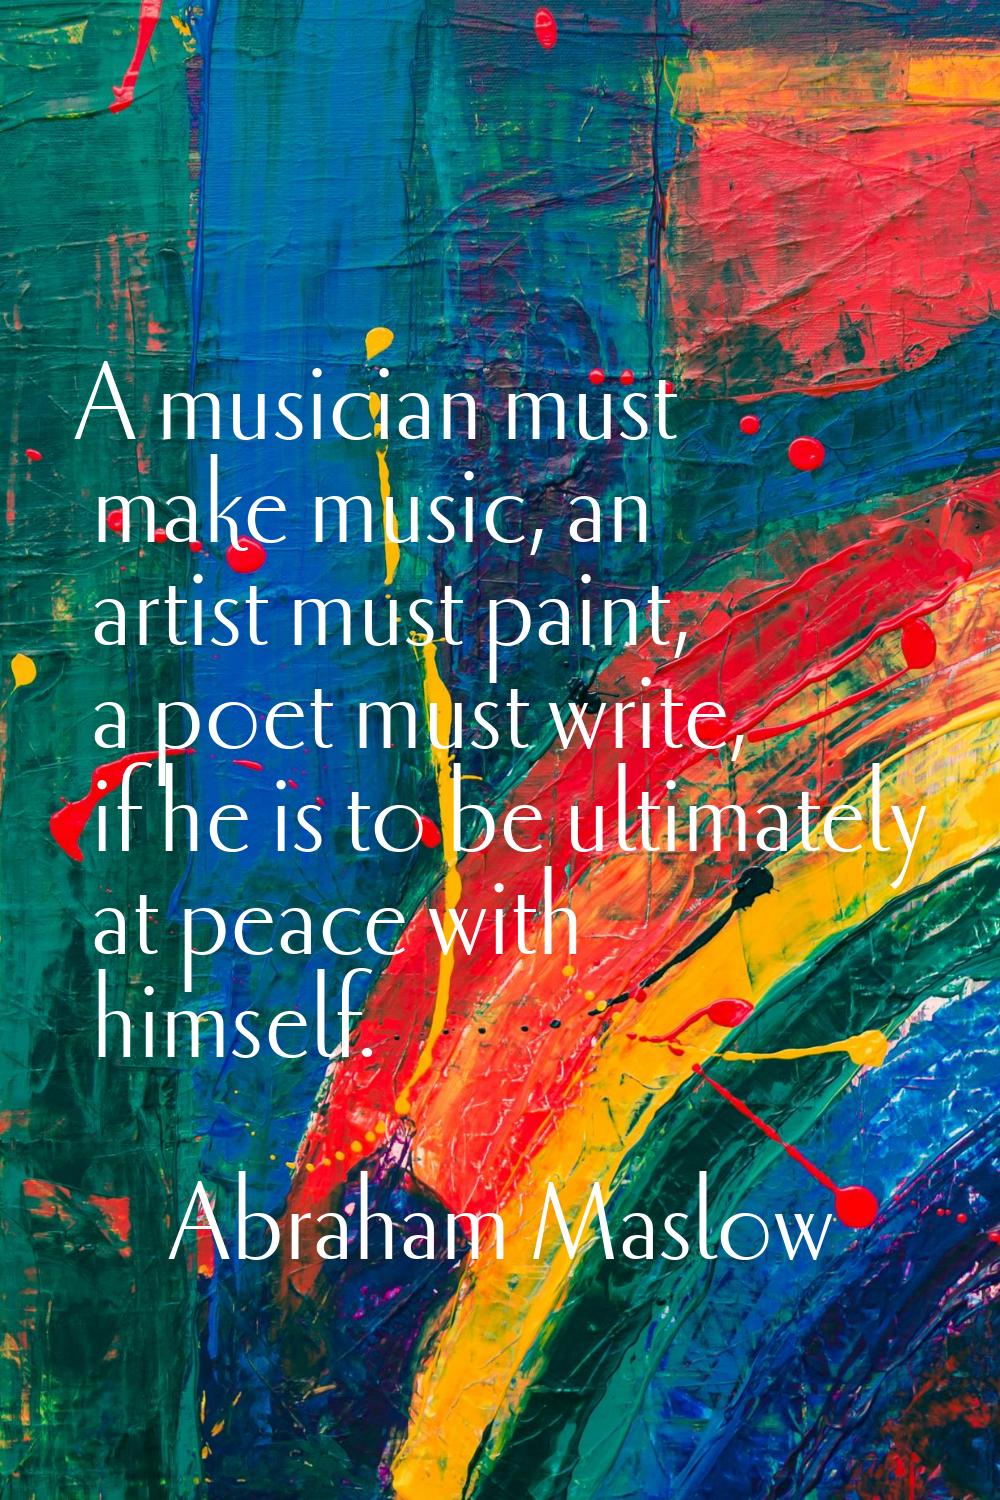 A musician must make music, an artist must paint, a poet must write, if he is to be ultimately at p